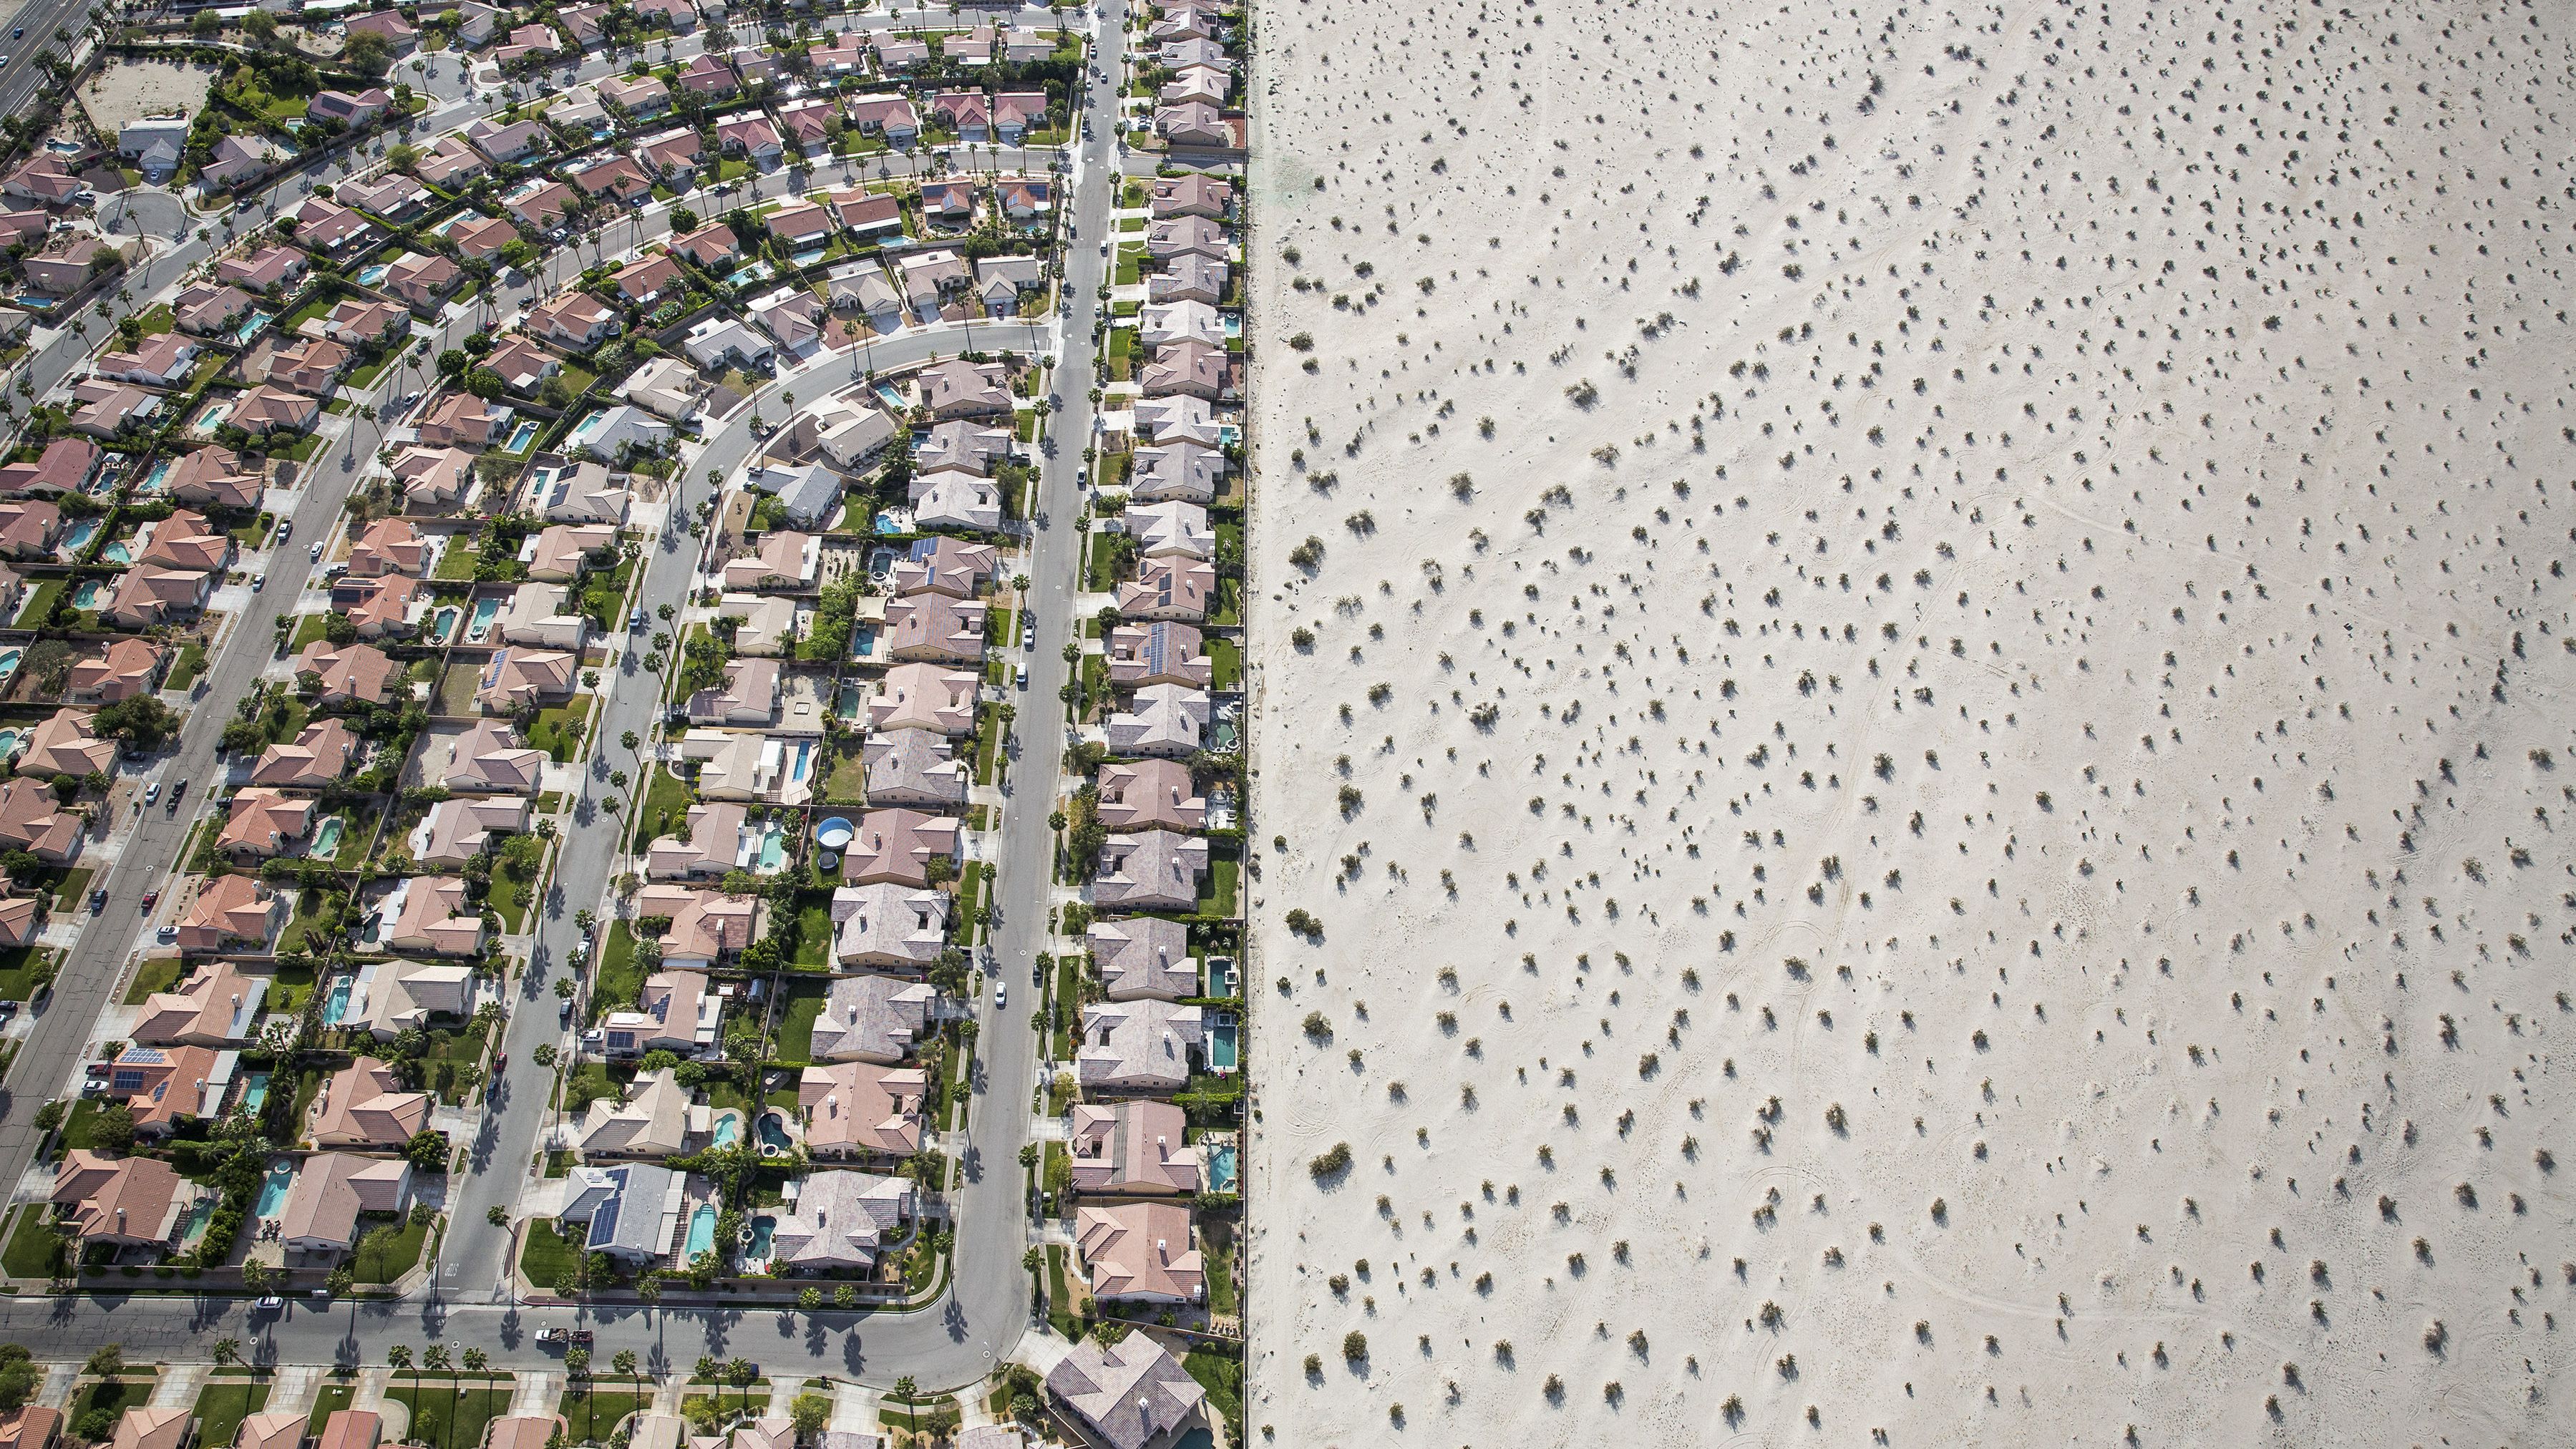 In this aerial photo, taken in April 2015, a housing development meets the edge of undeveloped desert in Cathedral City, California. California Gov. Jerry Brown imposed mandatory water restrictions on residents, businesses and farms in <a href="http://www.cnn.com/2014/07/17/us/gallery/california-drought/index.html" target="_blank">the drought-ravaged state,</a> ordering cities and towns to reduce their usage by 25%.